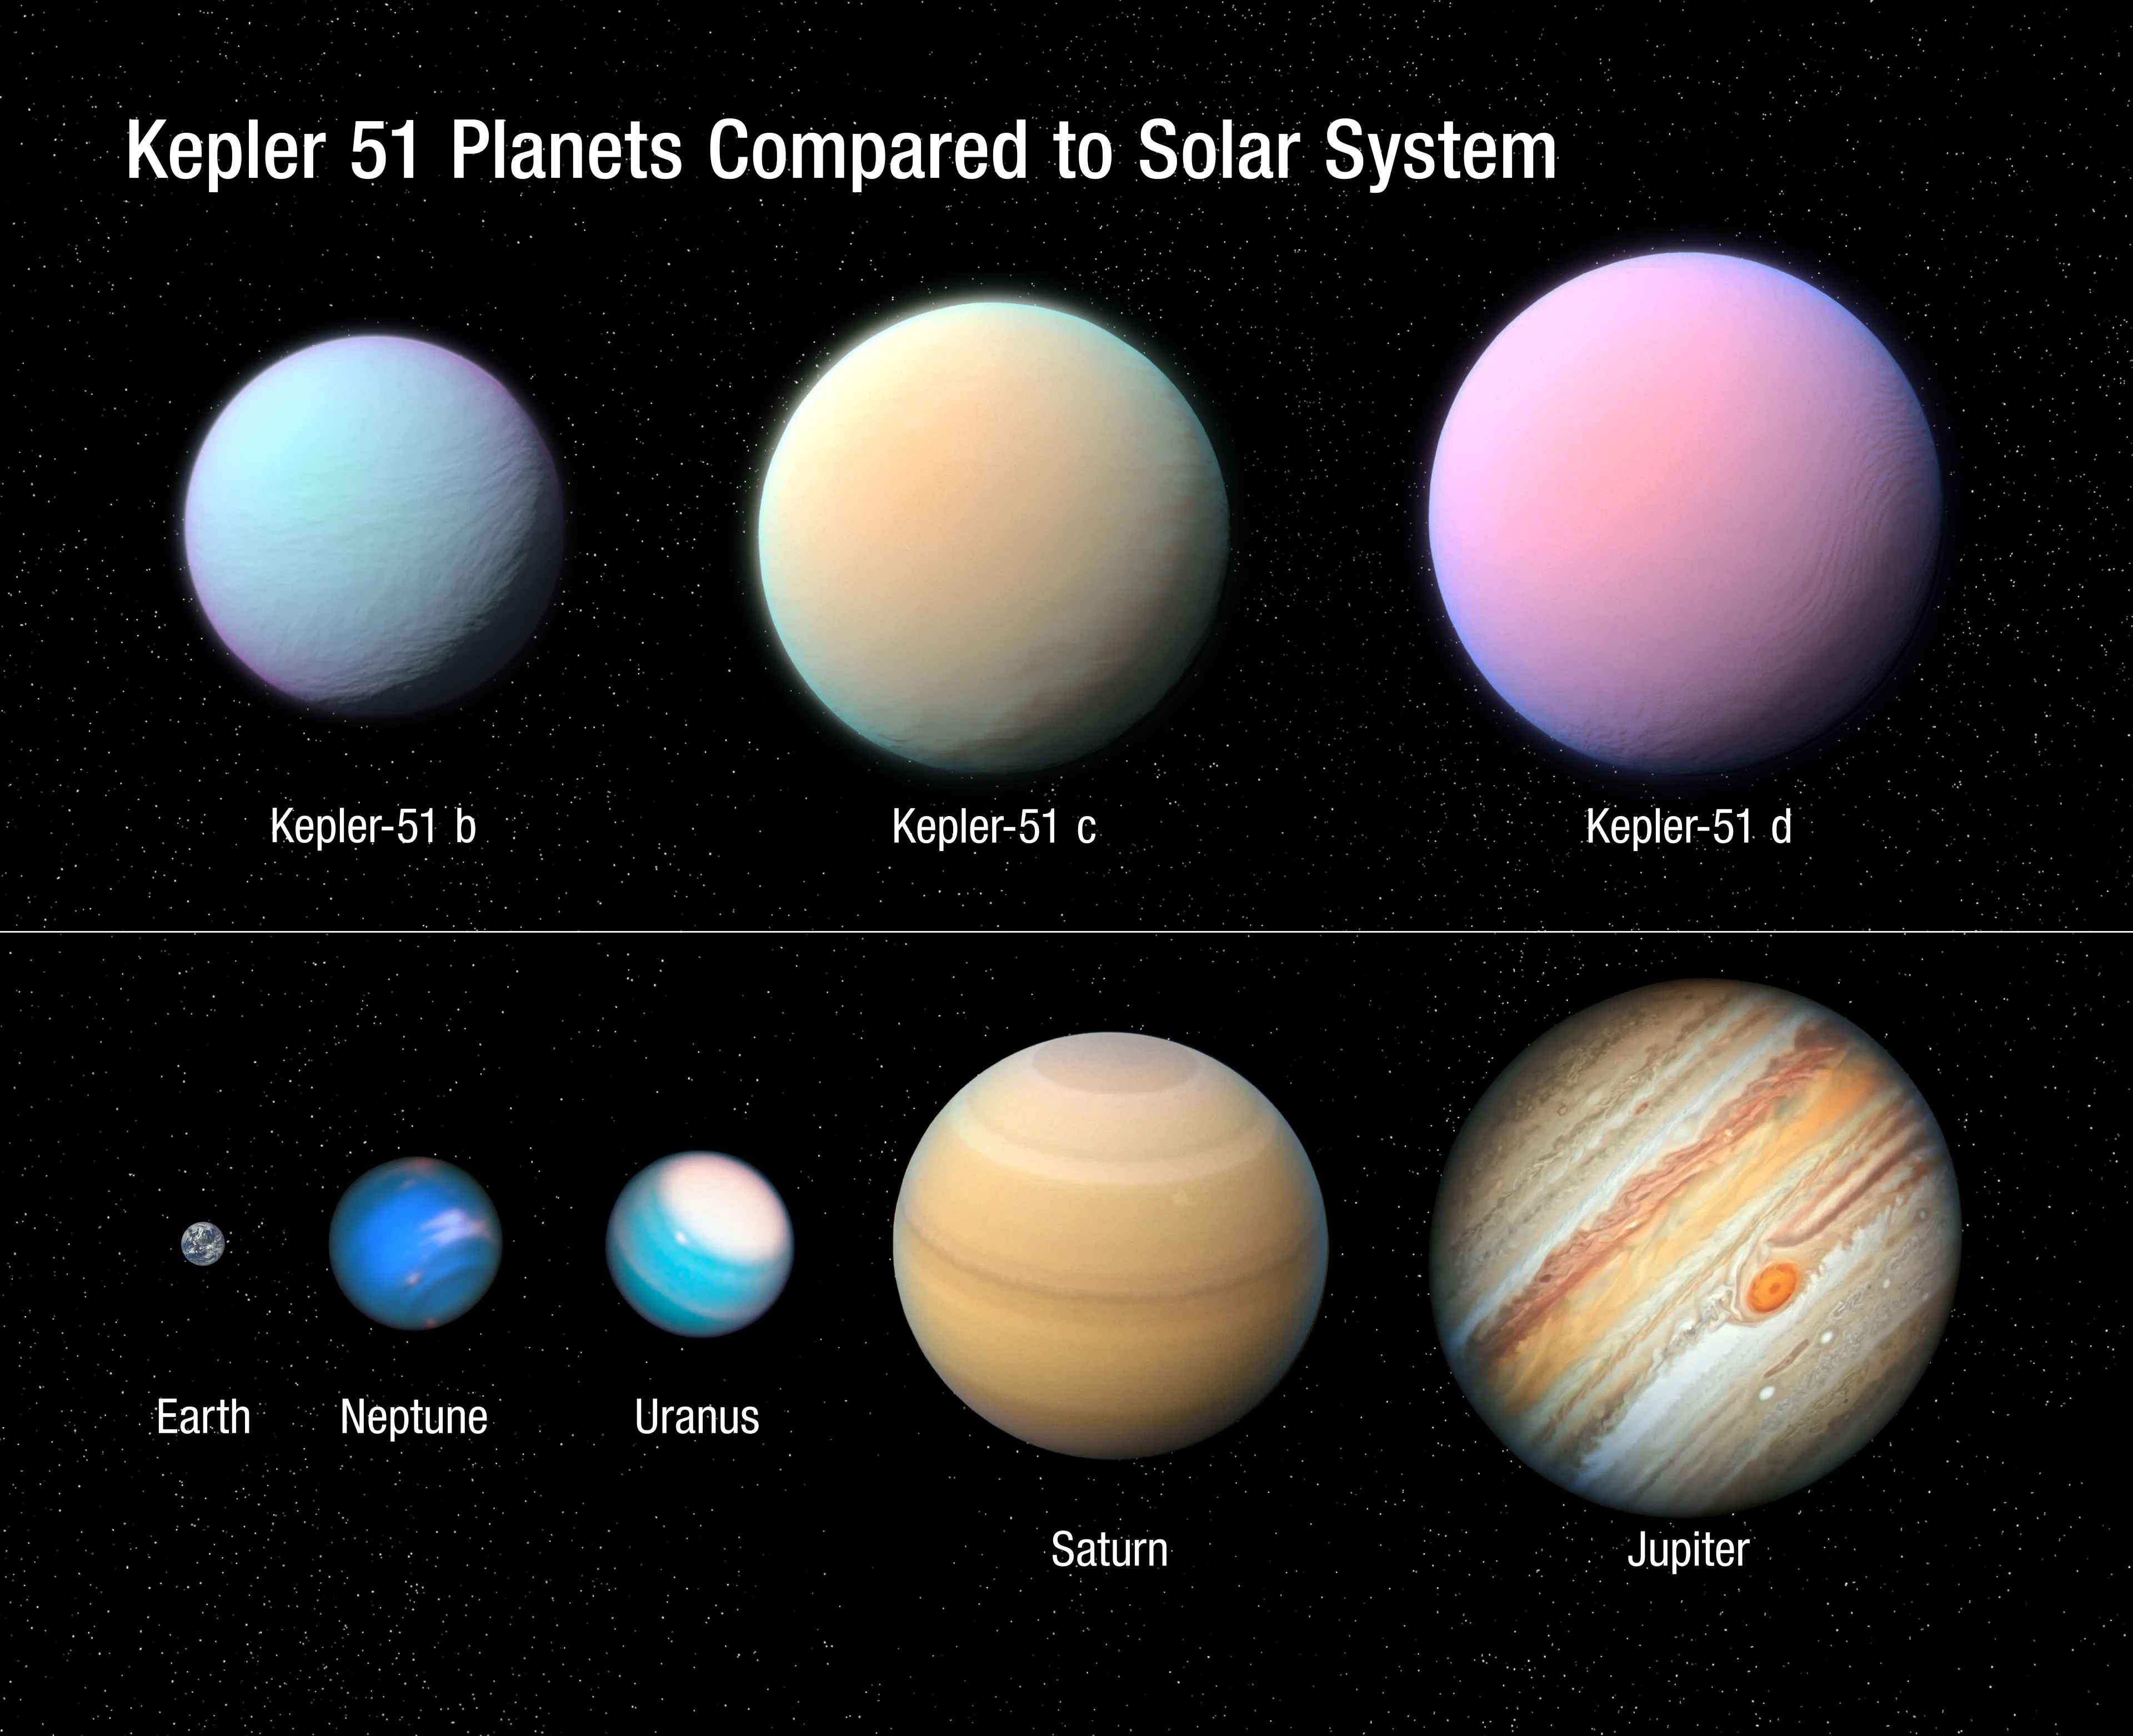 size comparison of planets in our solar system with planets in Kepler 51 system